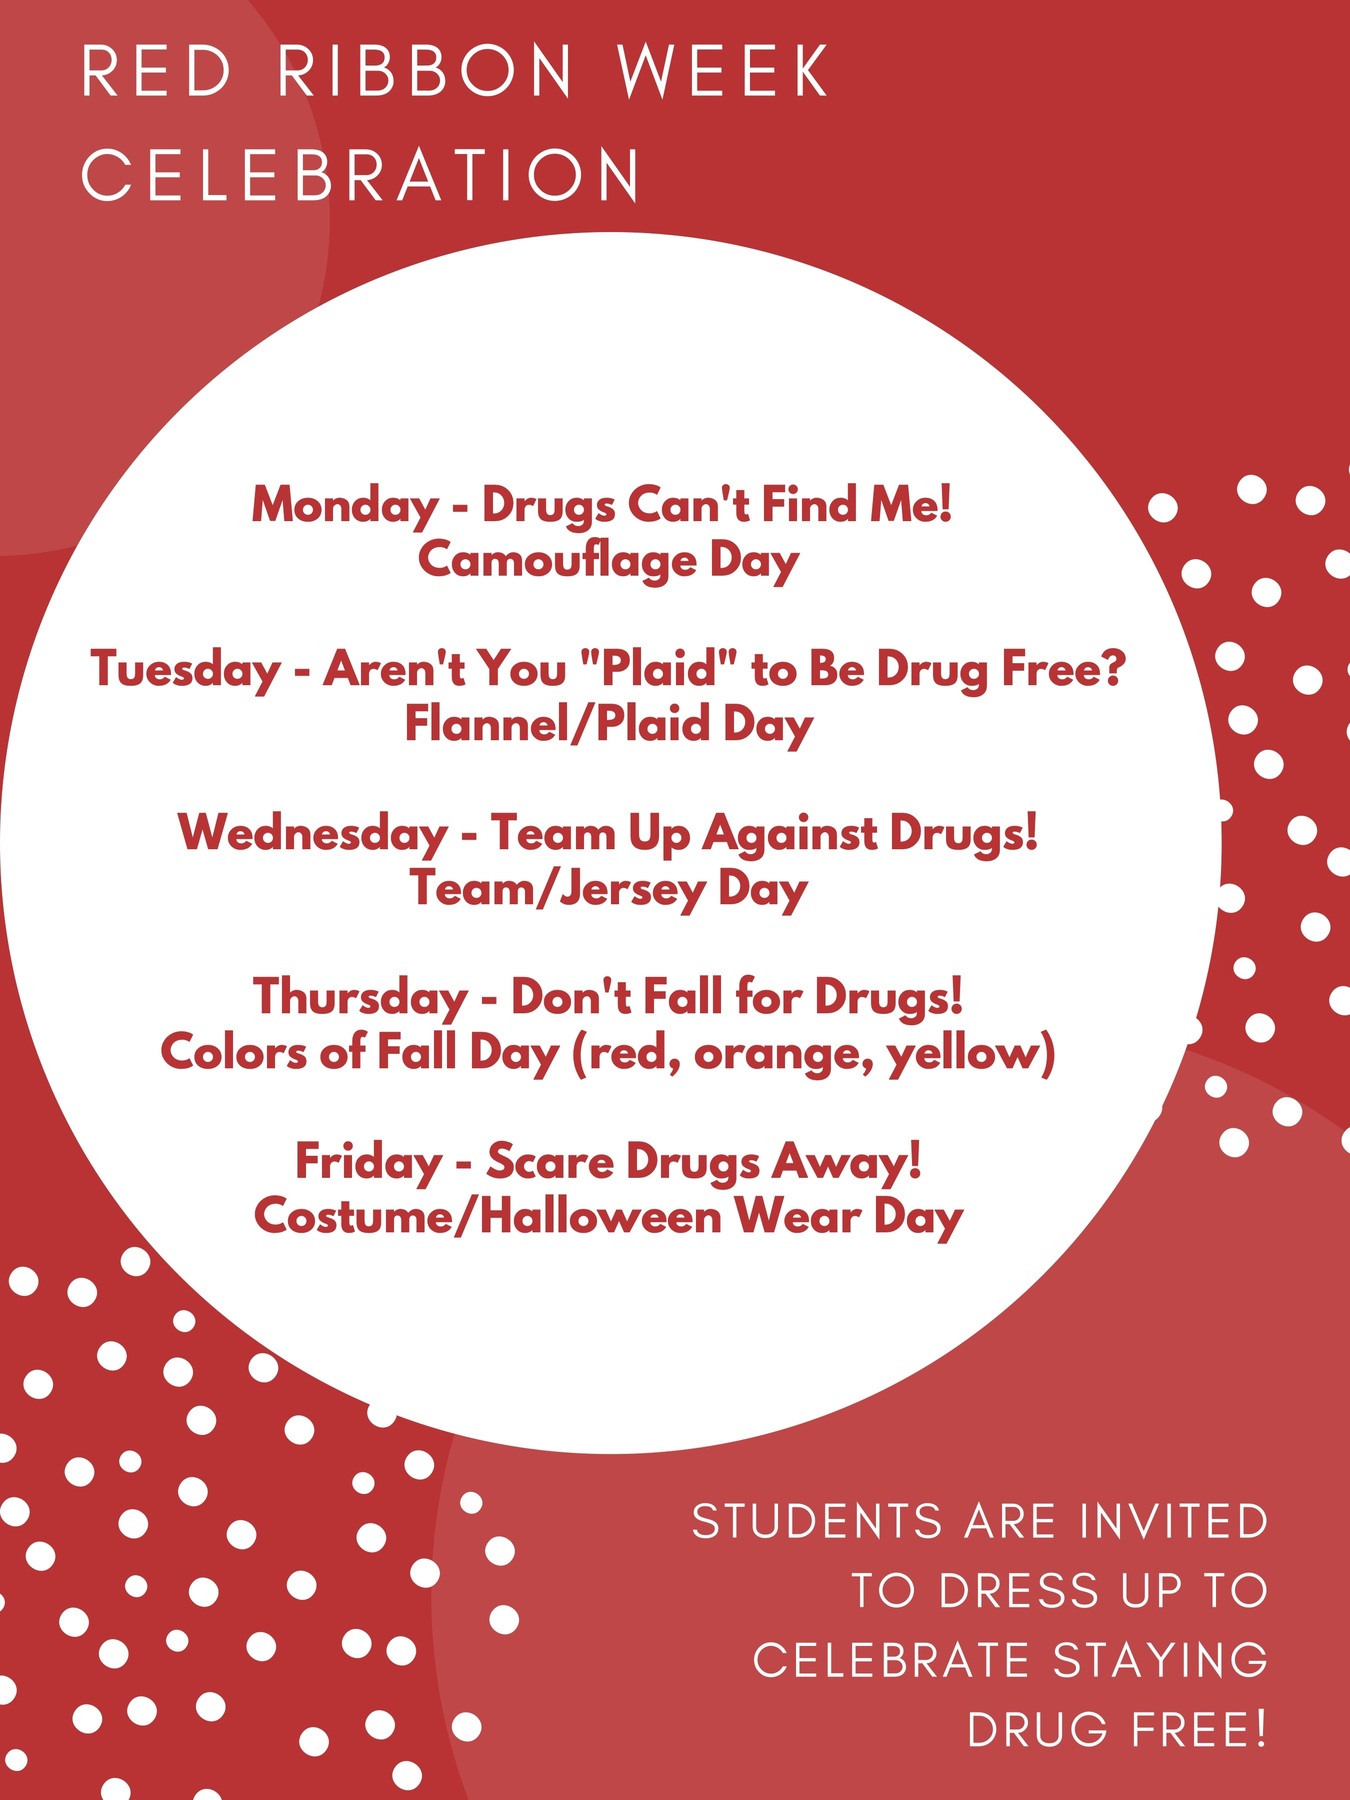 Please Join Us To Celebrate Red Ribbon Week!